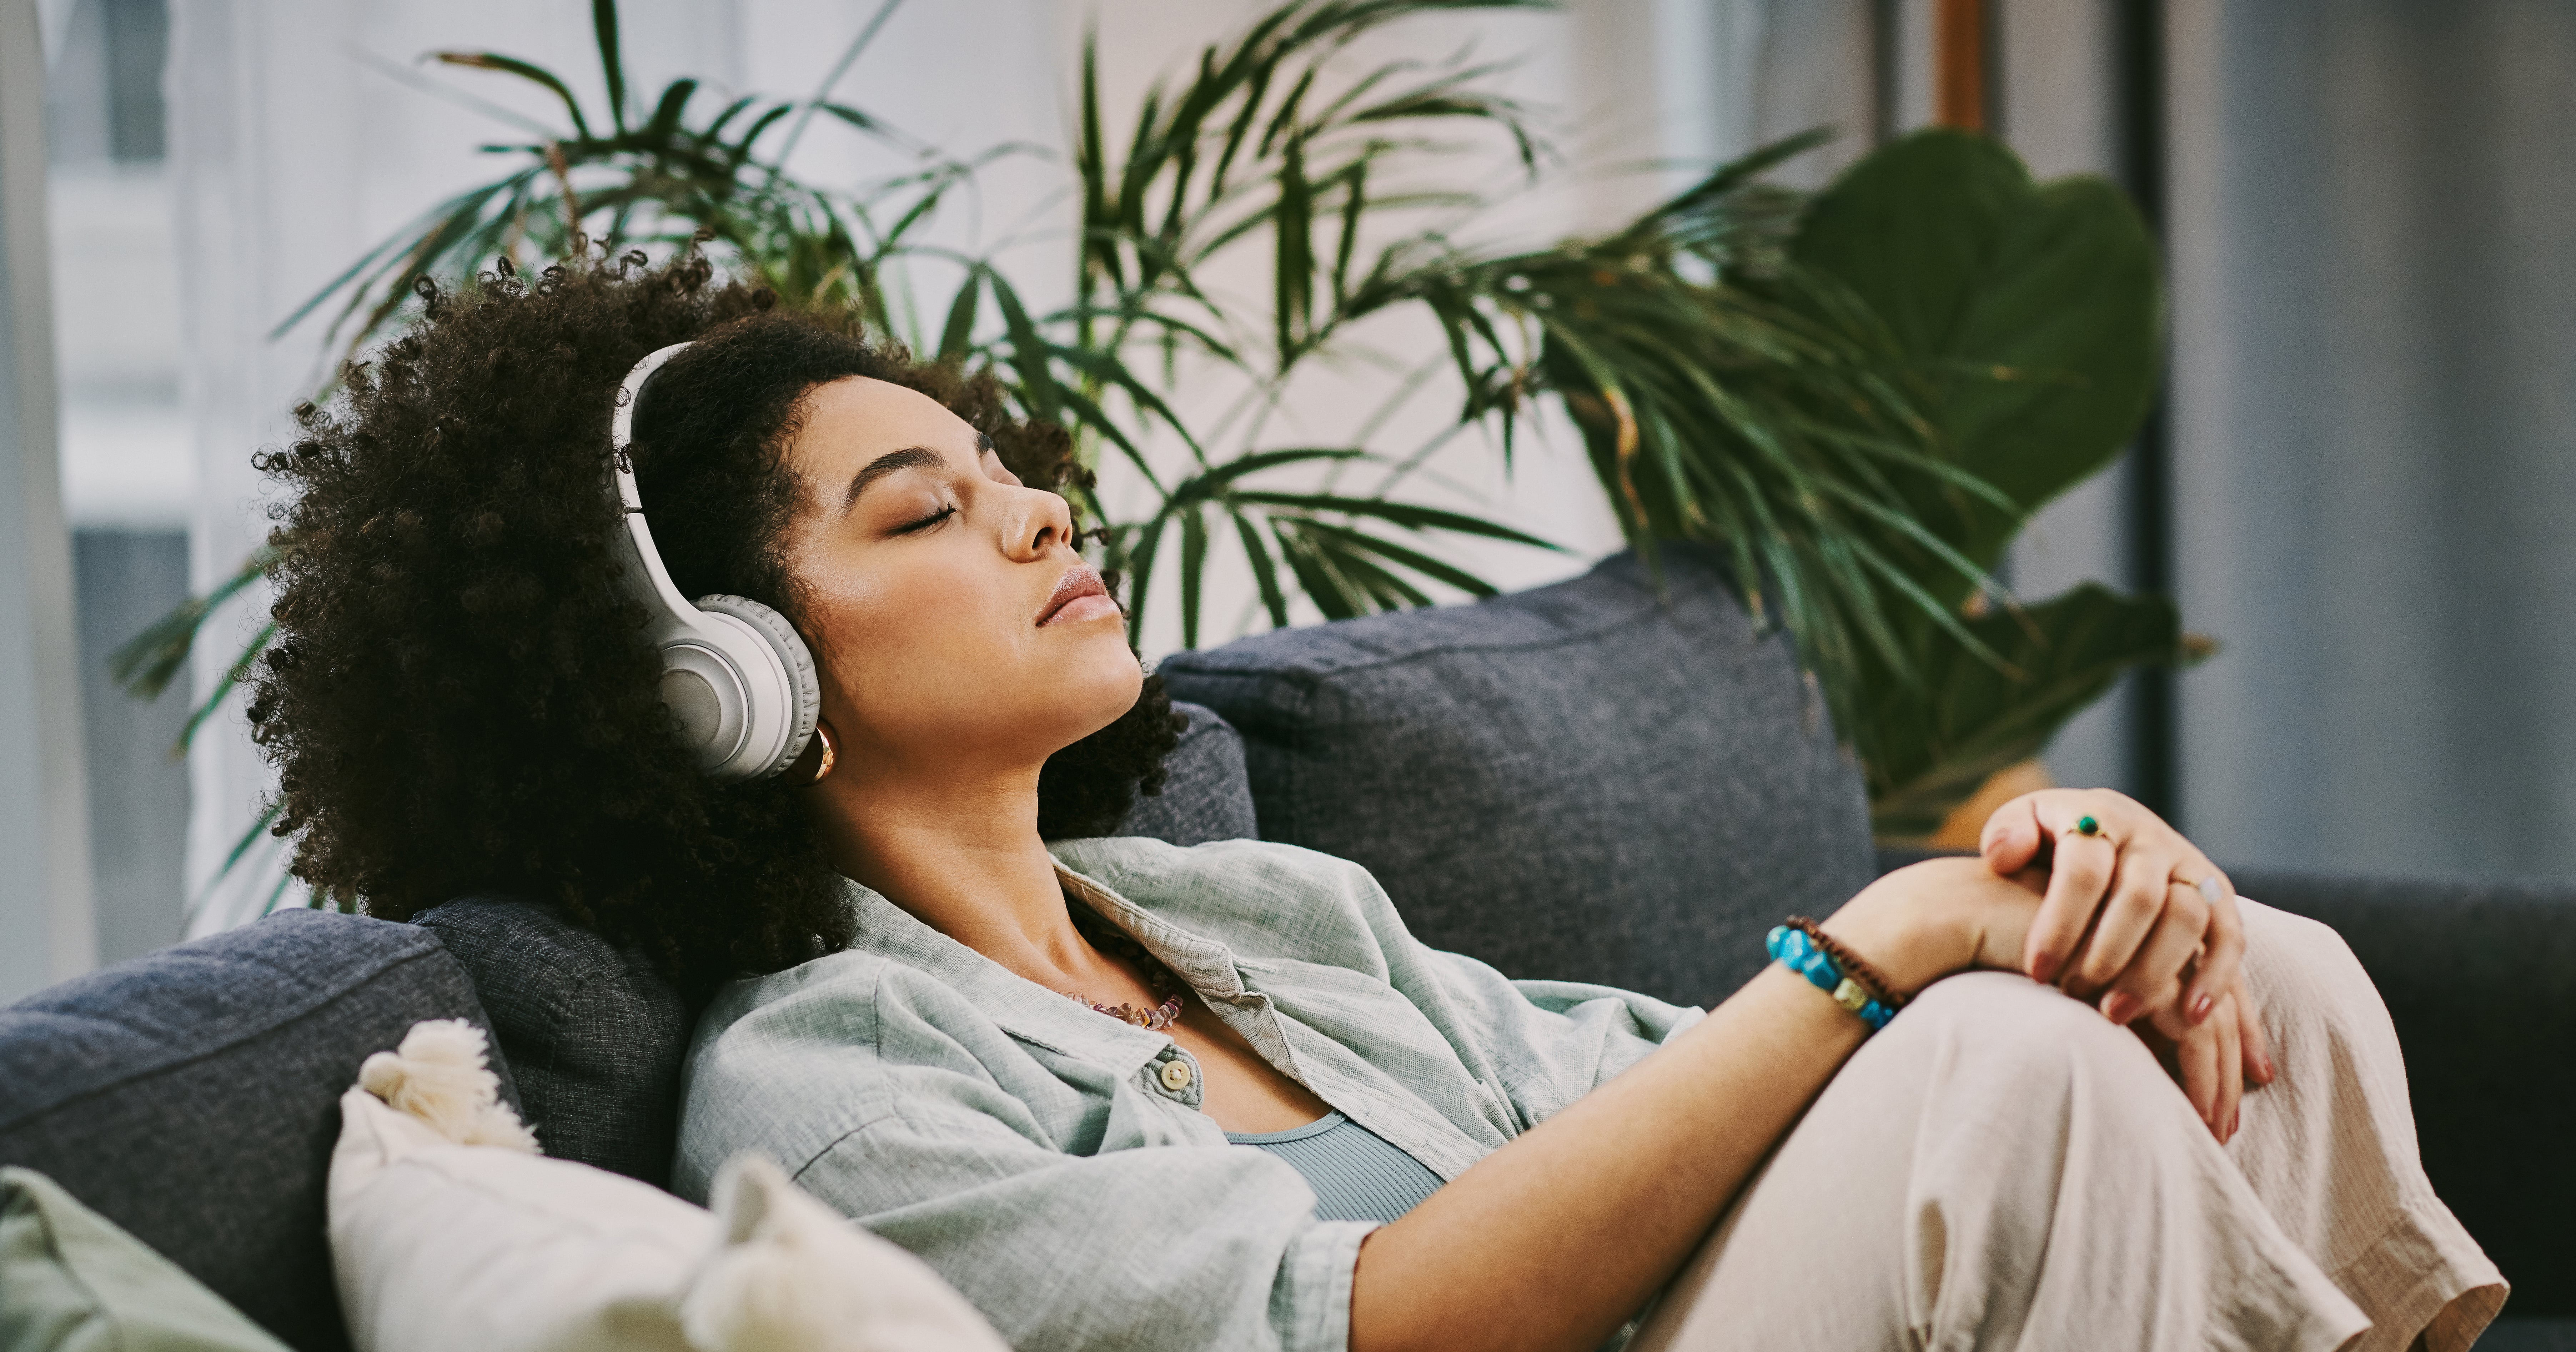 I Tried Sound Frequency Therapy to Help My Chronic Pain — Here’s How It Went